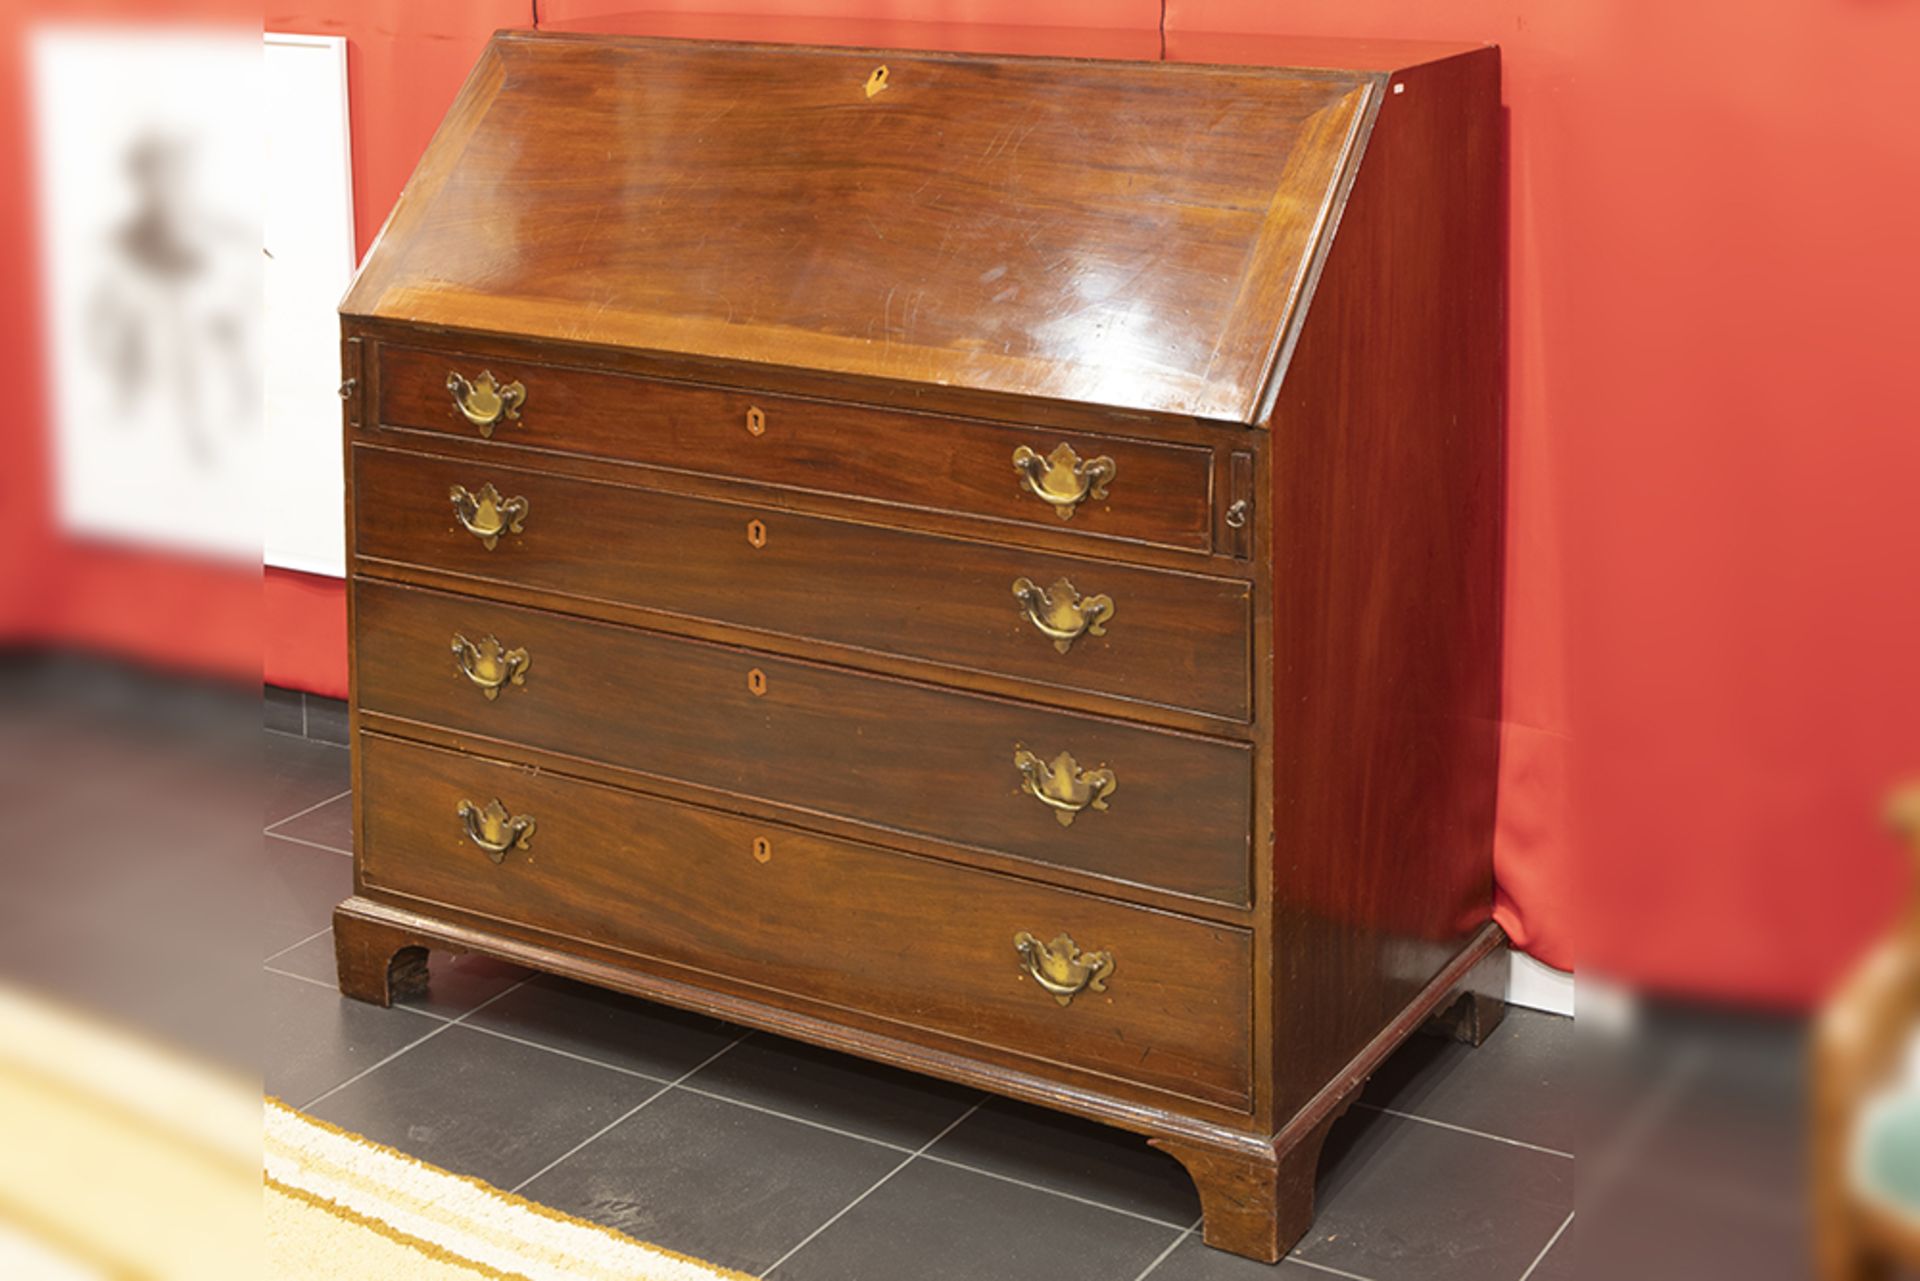 late 18th Cent. English Georgian bureau in mahogany with a nice interior partially in marquetry ||